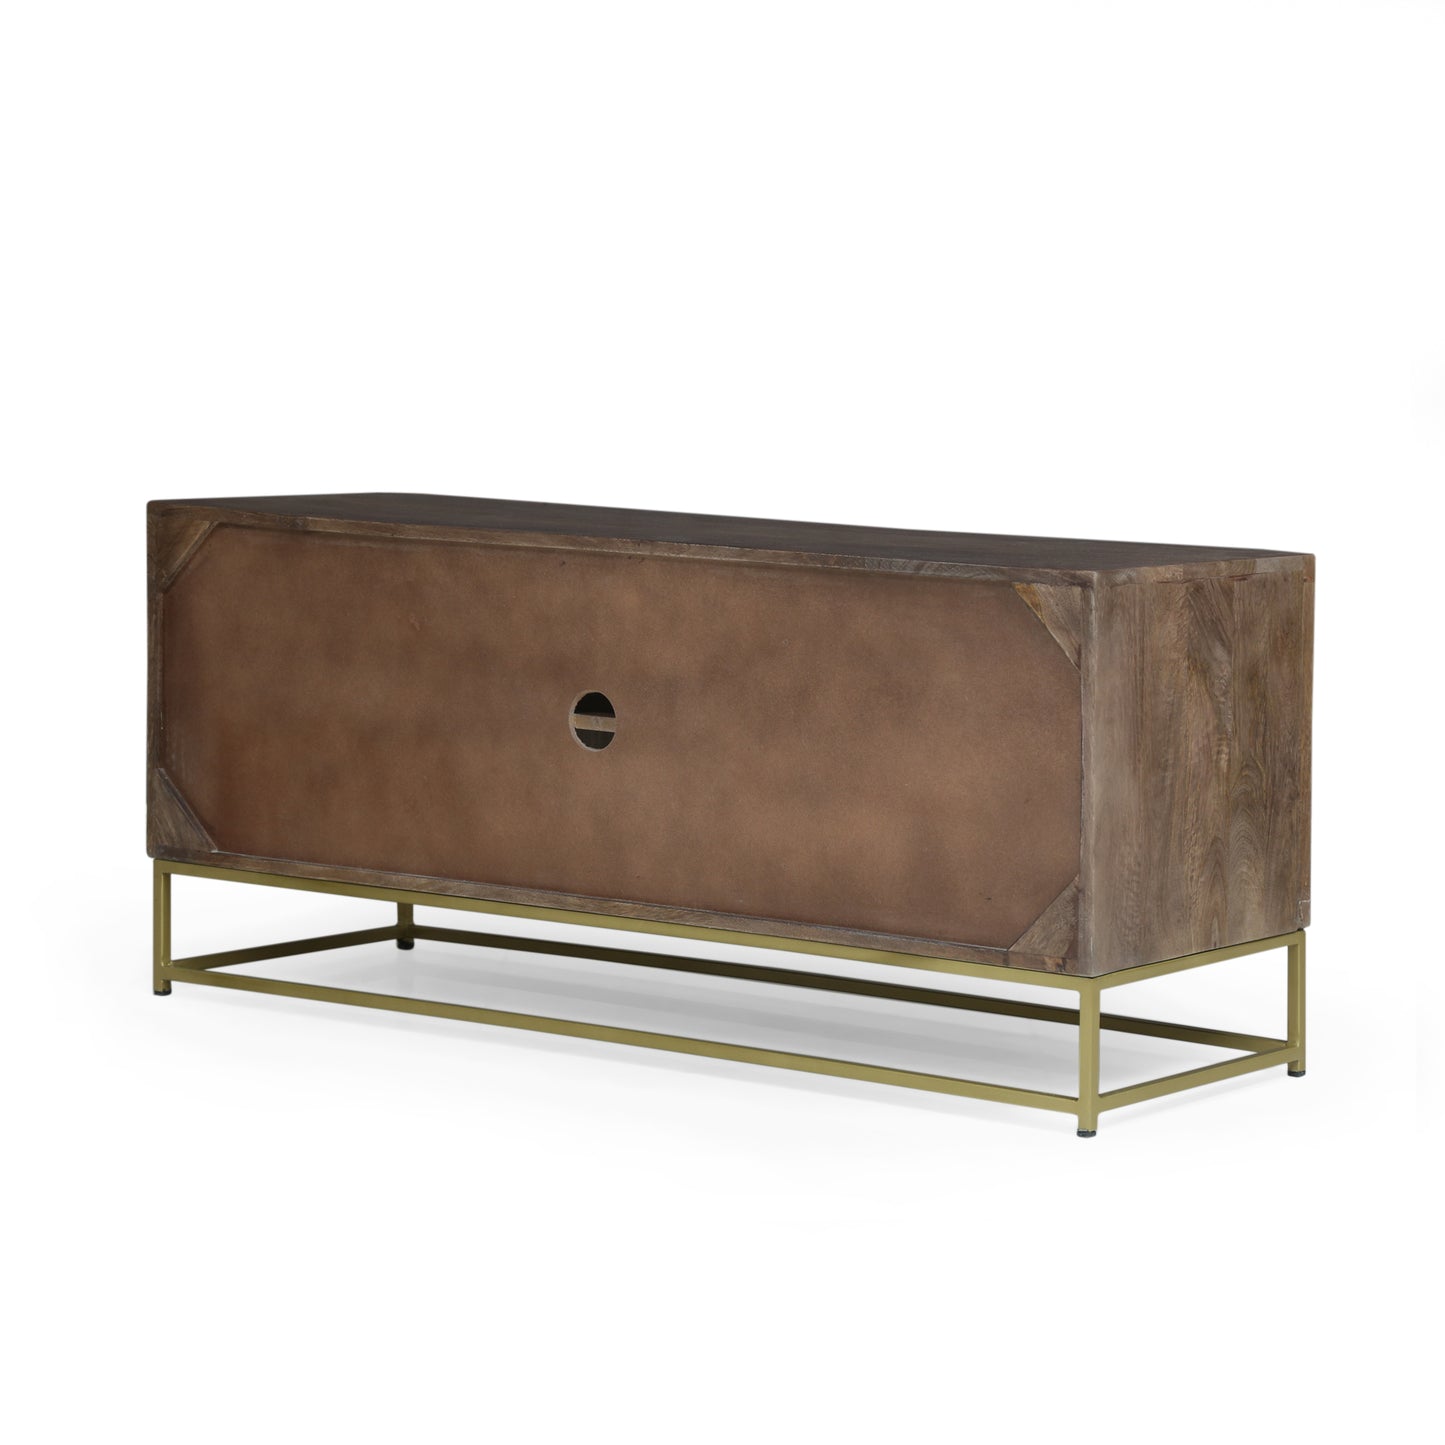 Javayah Contemporary Wooden TV Stand